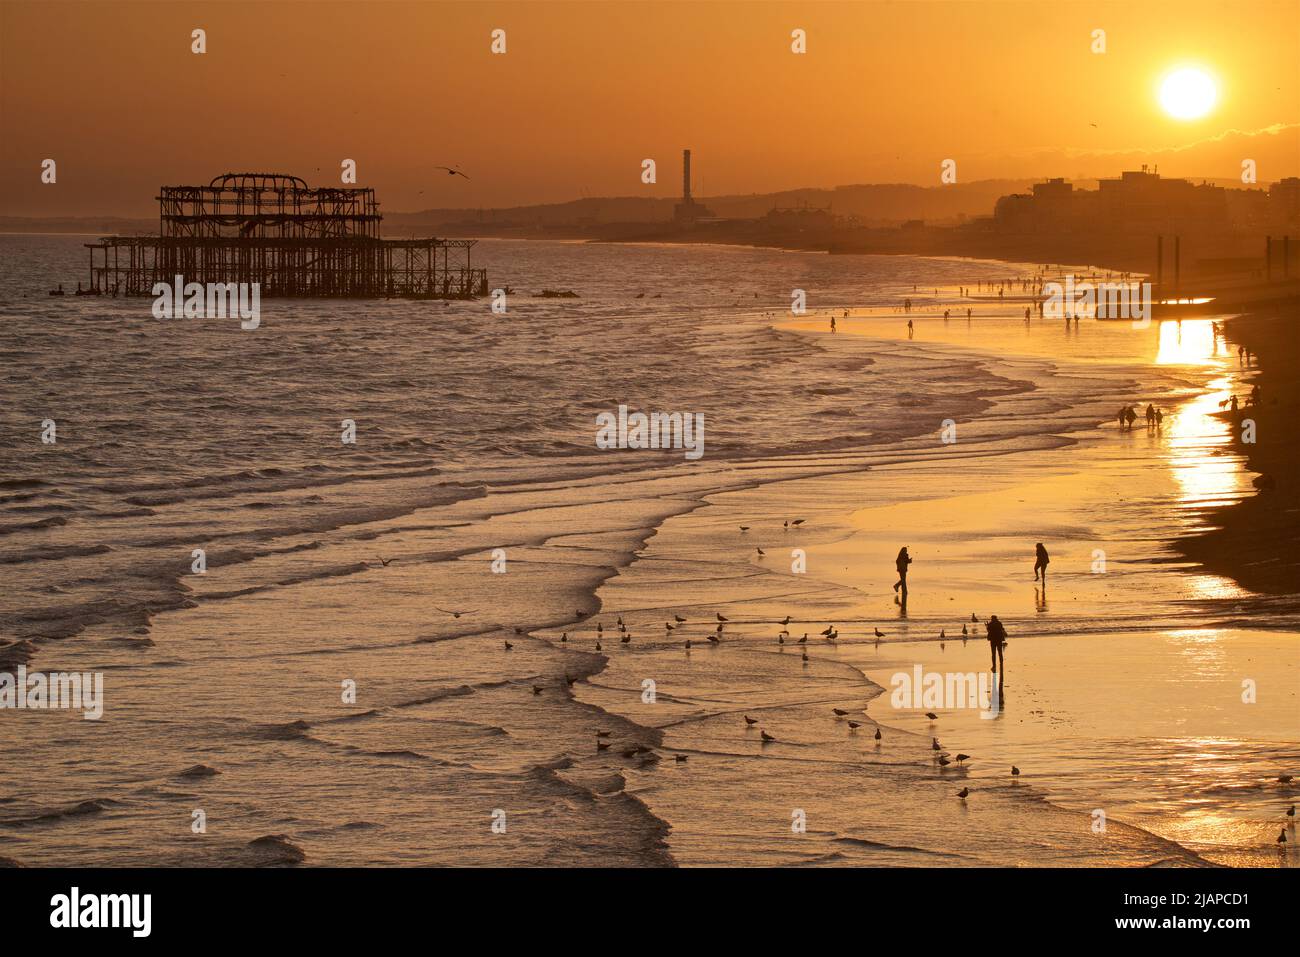 Silhouetted shapes of people on the beach at low tide, Brighton & Hove, East Sussex, England, UK. Remains of the West Pier and Shoreham Power Station in the distance. Stock Photo